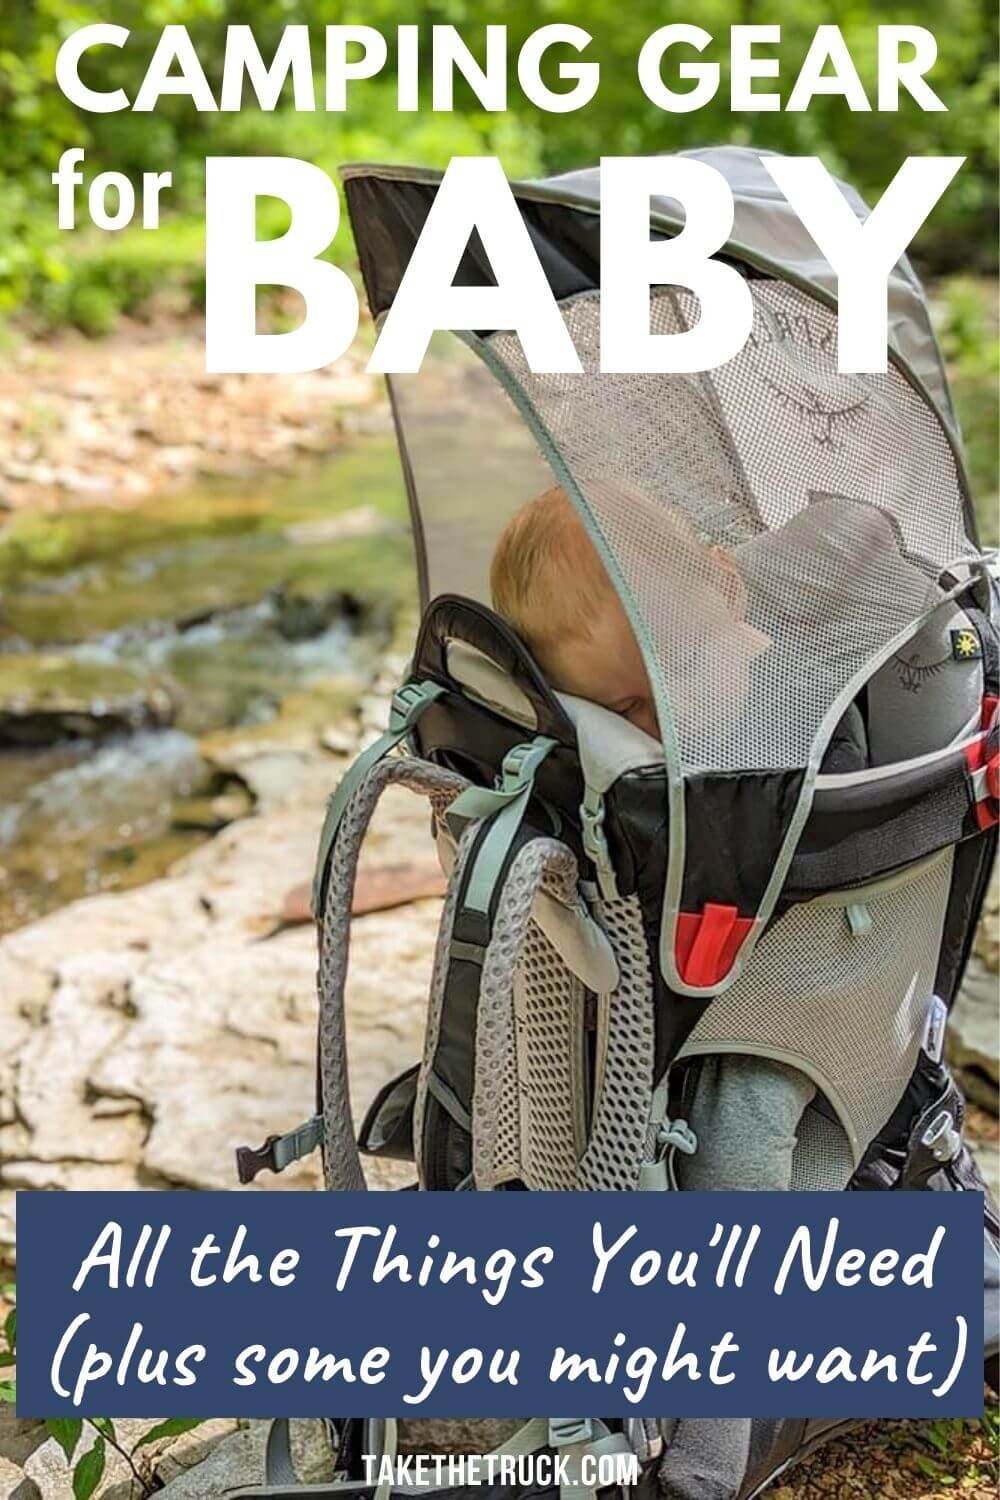 camping gear for baby | camping gear for babies | baby camping gear